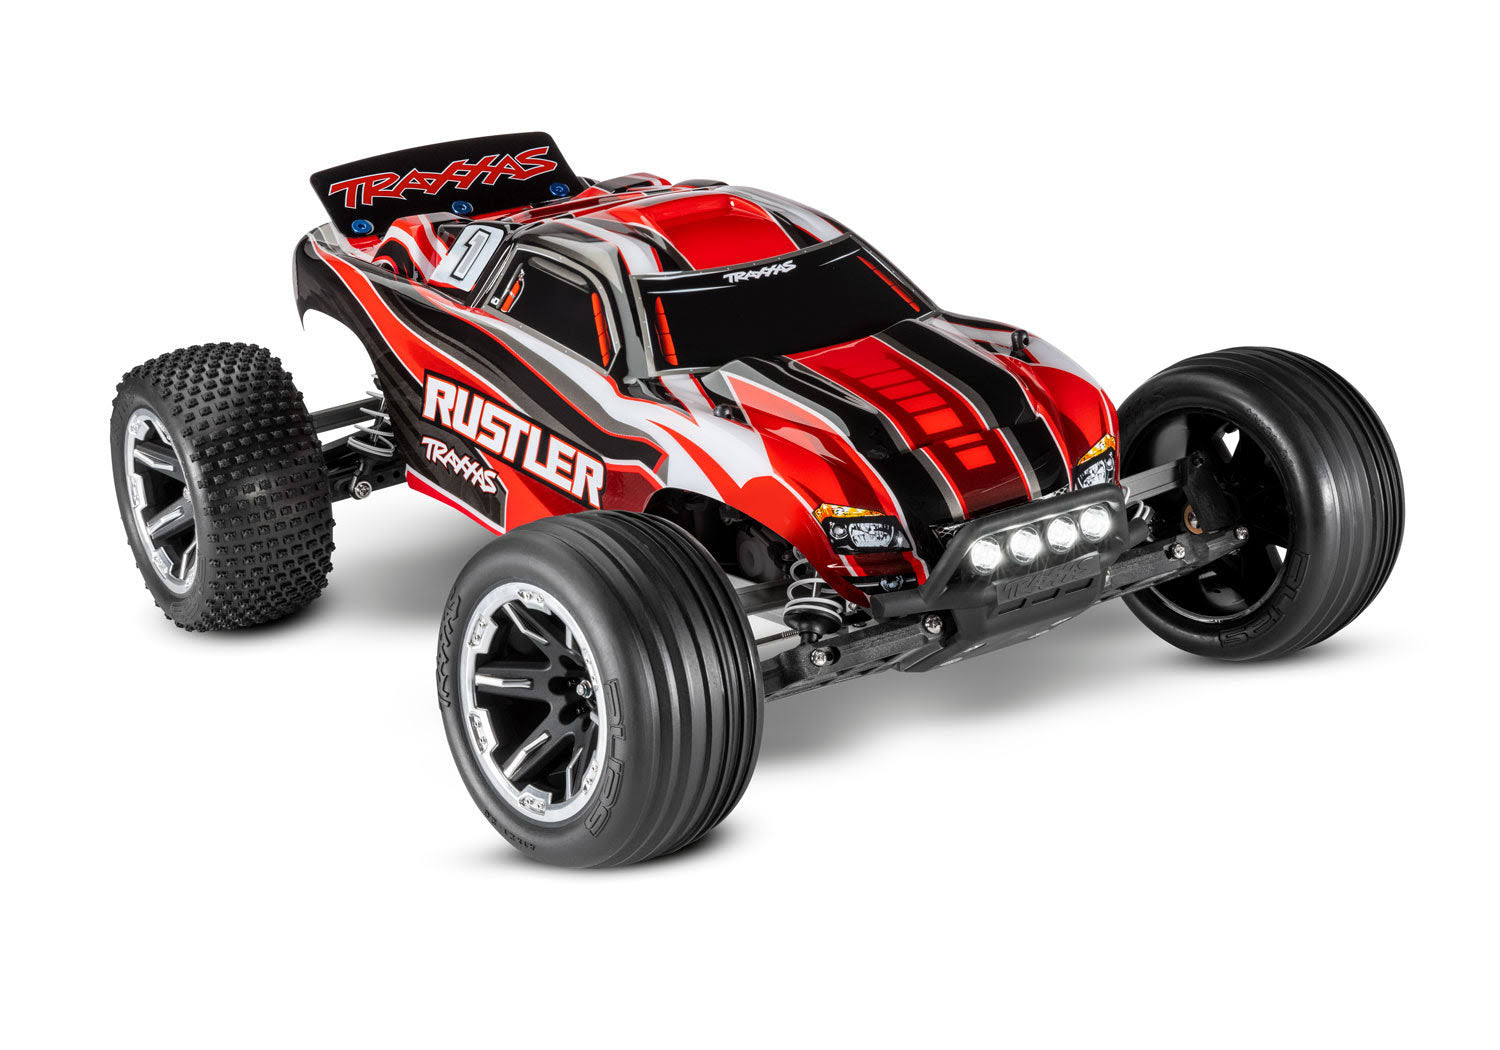 Traxxas - Rustler RTR 2WD RC Truck with LED Lights with Battery & Charger - Black - XL-5 1/10 Scale (37054-61-BLK)